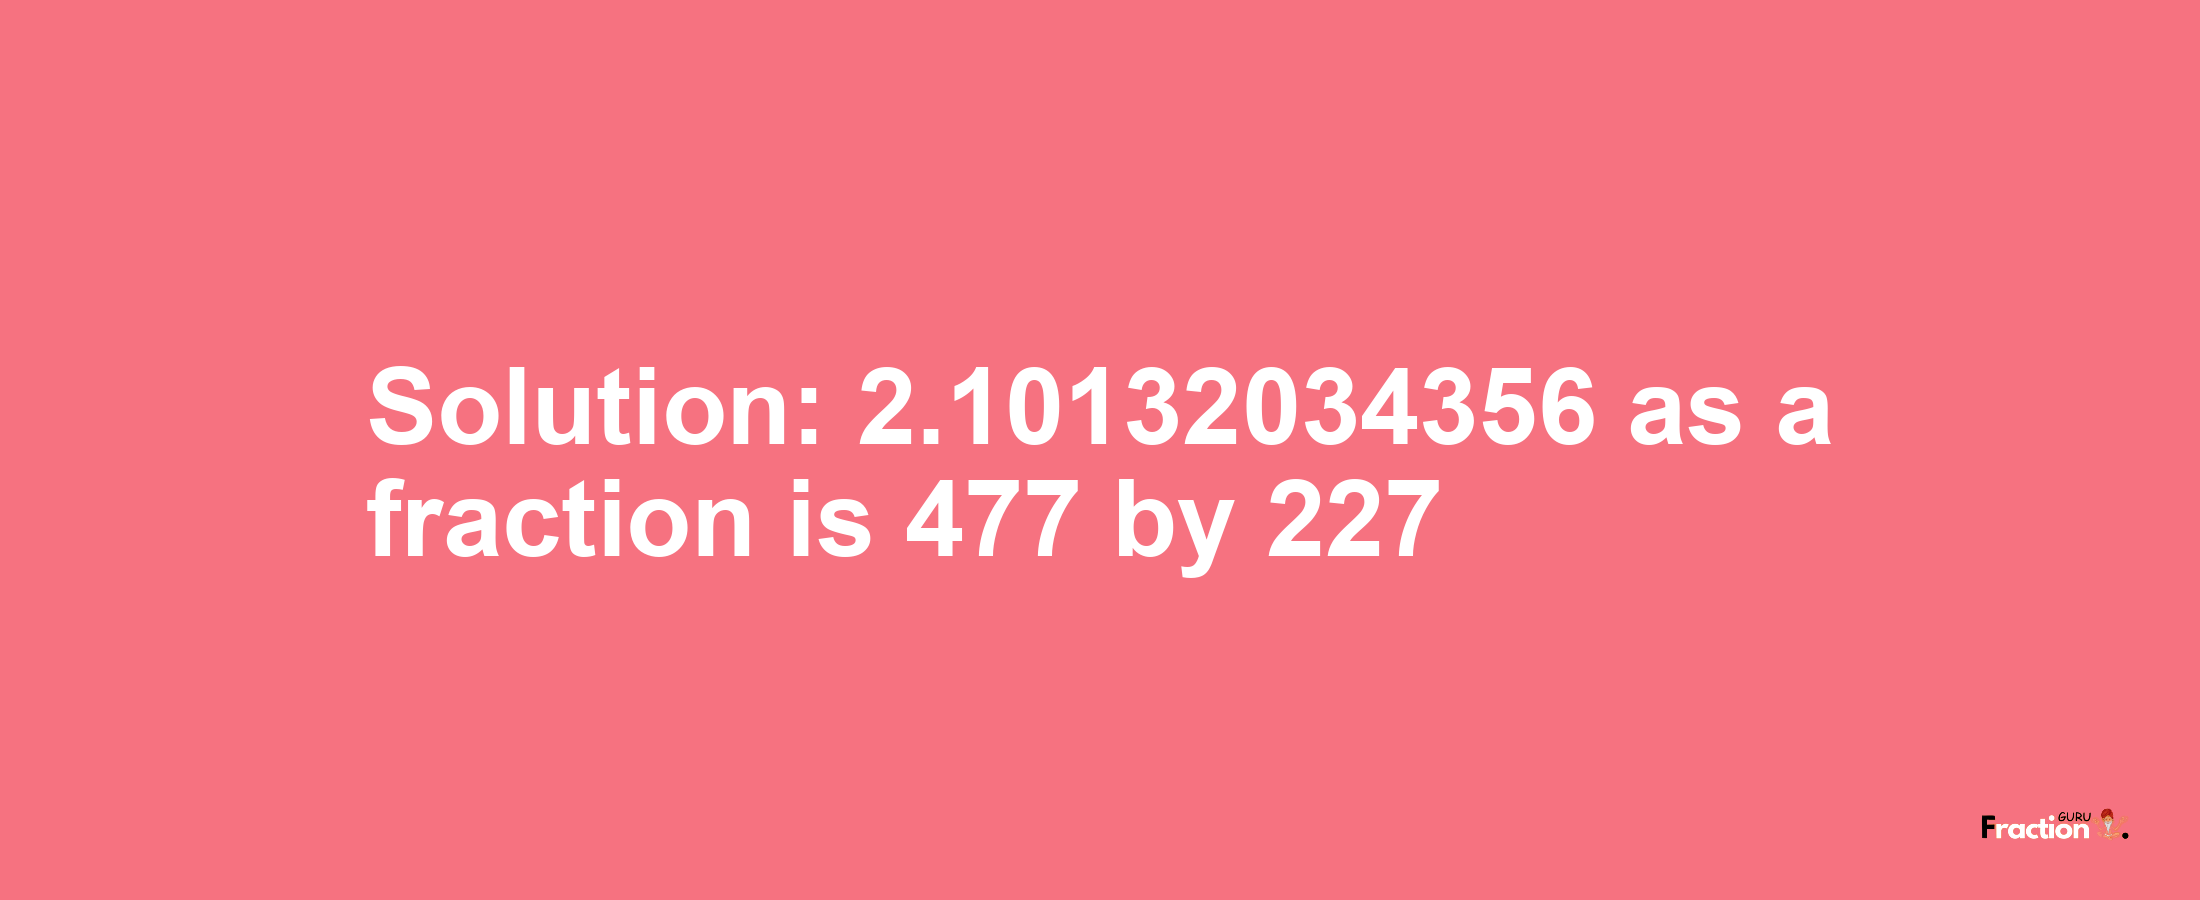 Solution:2.10132034356 as a fraction is 477/227